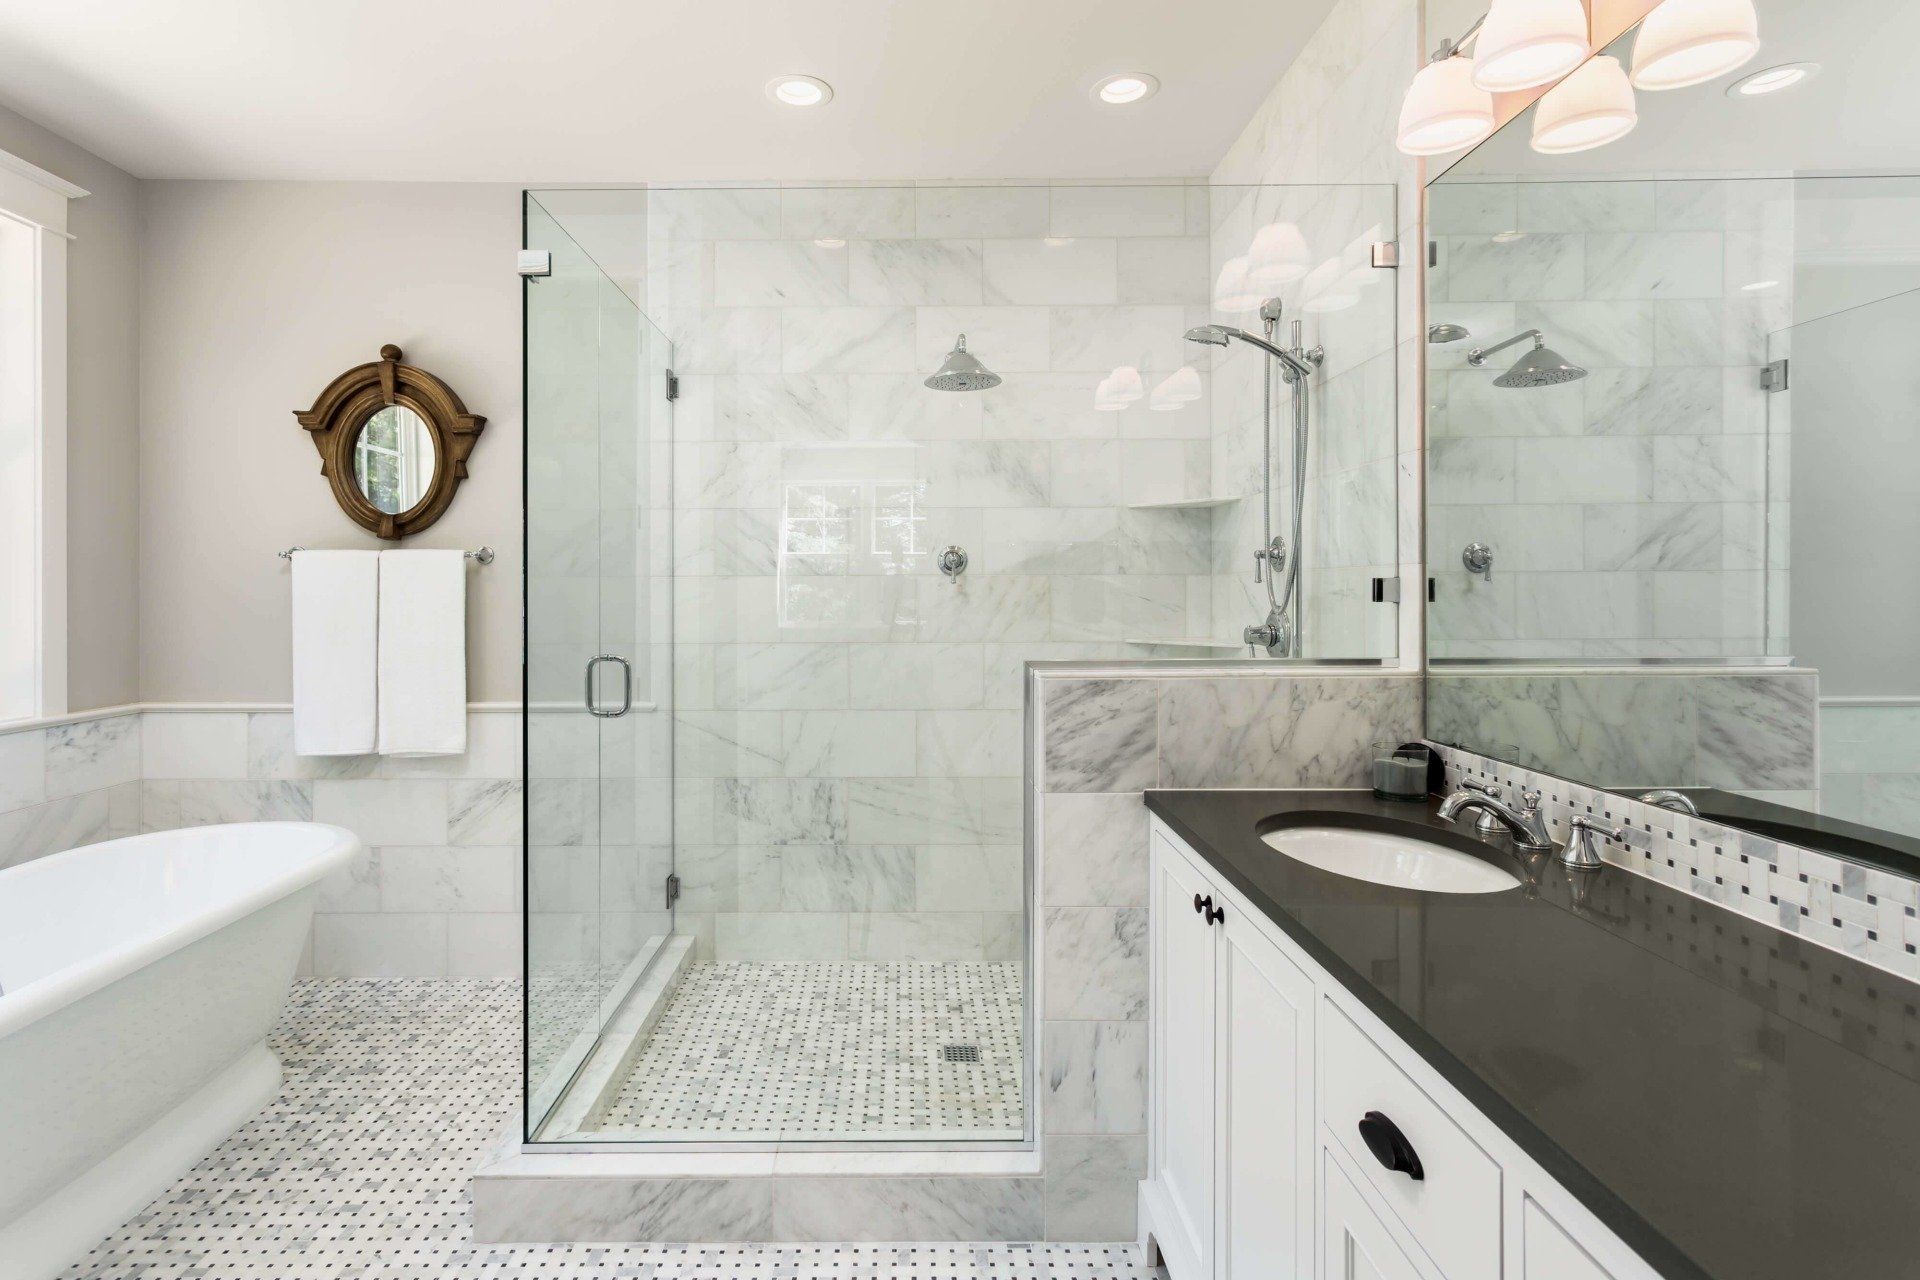 Clean Bathroom - Residential Remodeling Contractors in Channahon, IL